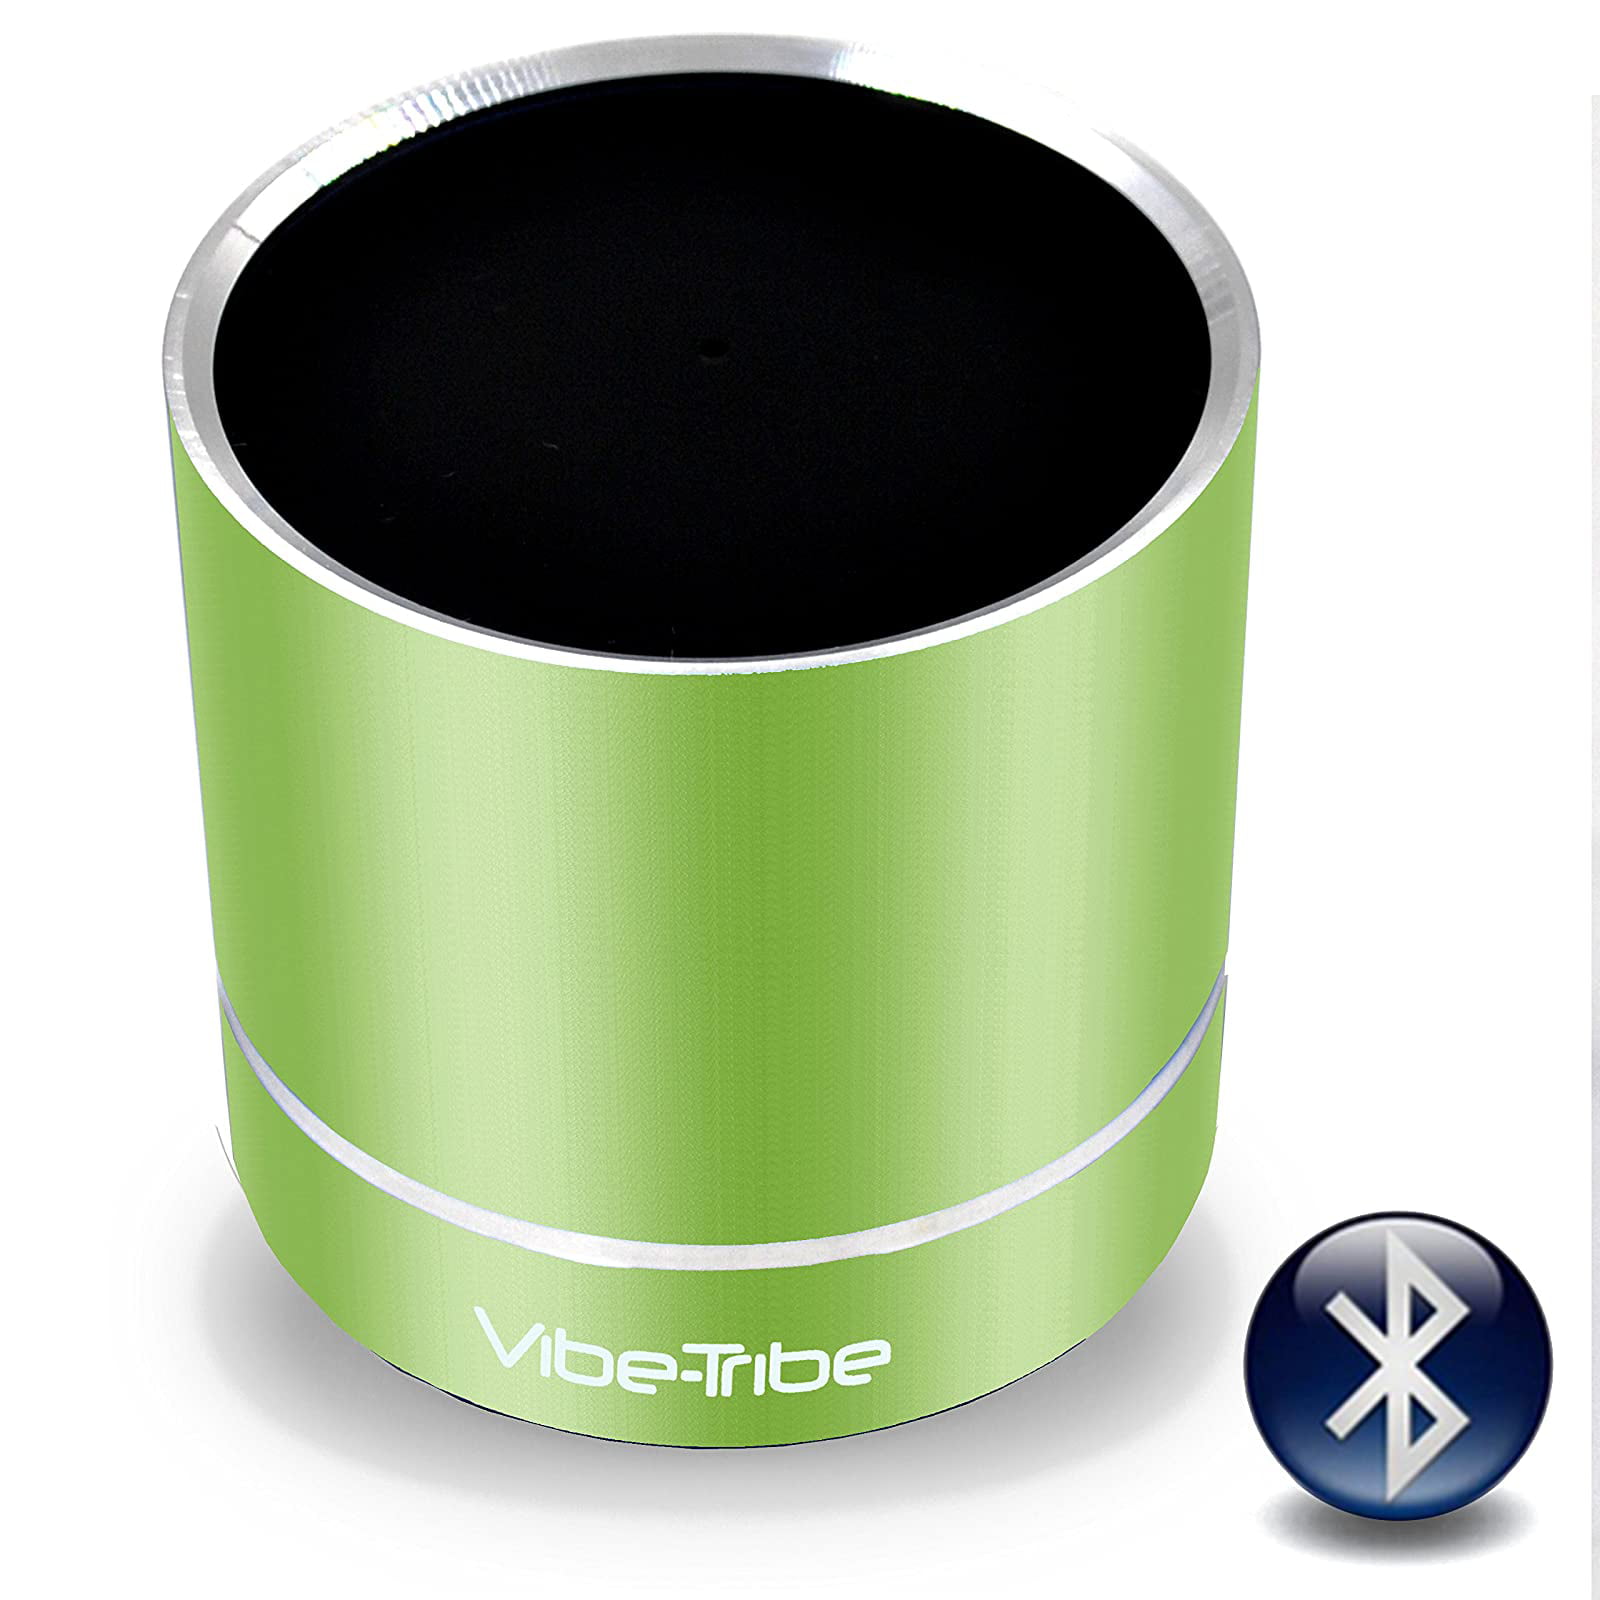 Troll Mini Ruby Red: The Ultracompact Vibration Speaker Vibe-Tribe 3 Watt with Bluetooth and Hands Free.